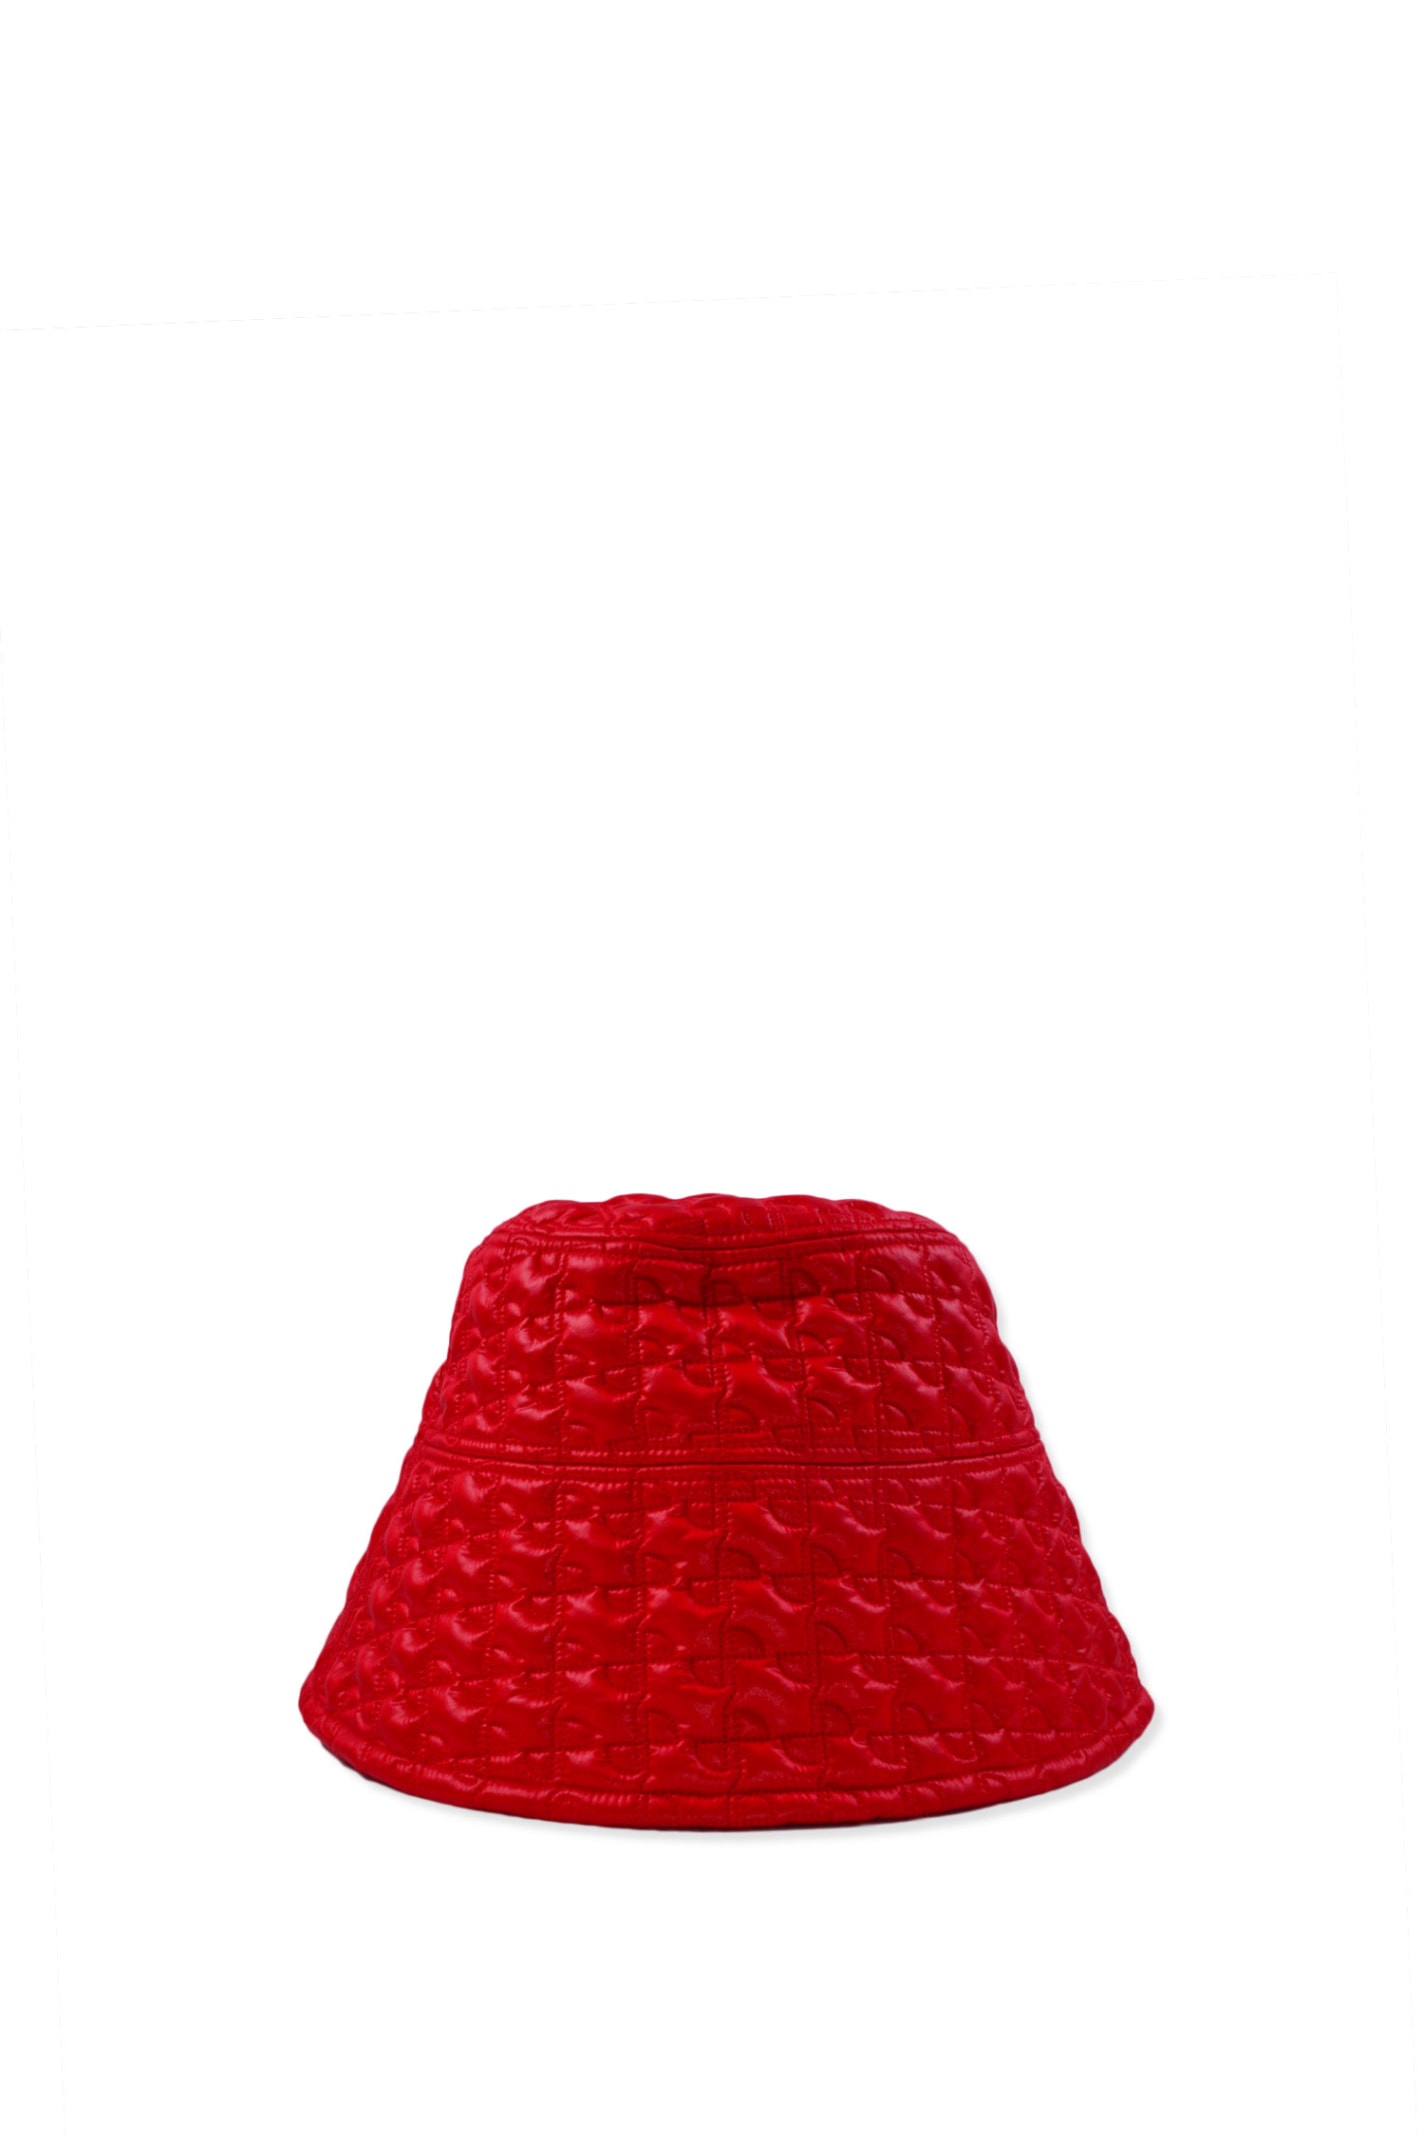 Shop Patou Hat In Red